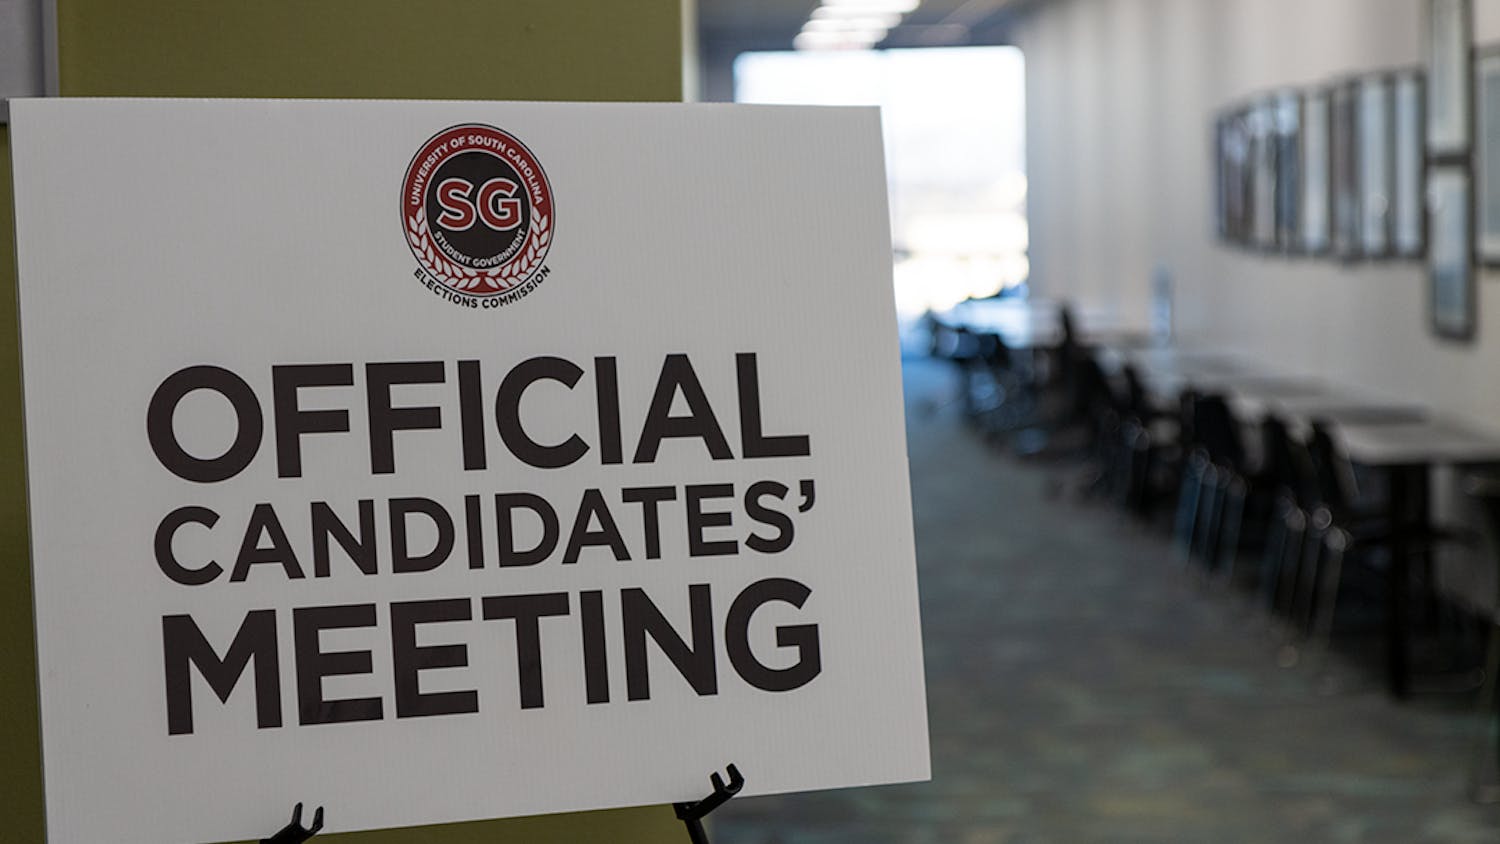 The Student Government Elections Commission met on Feb. 10, 2022, with prospective candidates to unveil the executive office candidate list for the upcoming Student Government election.